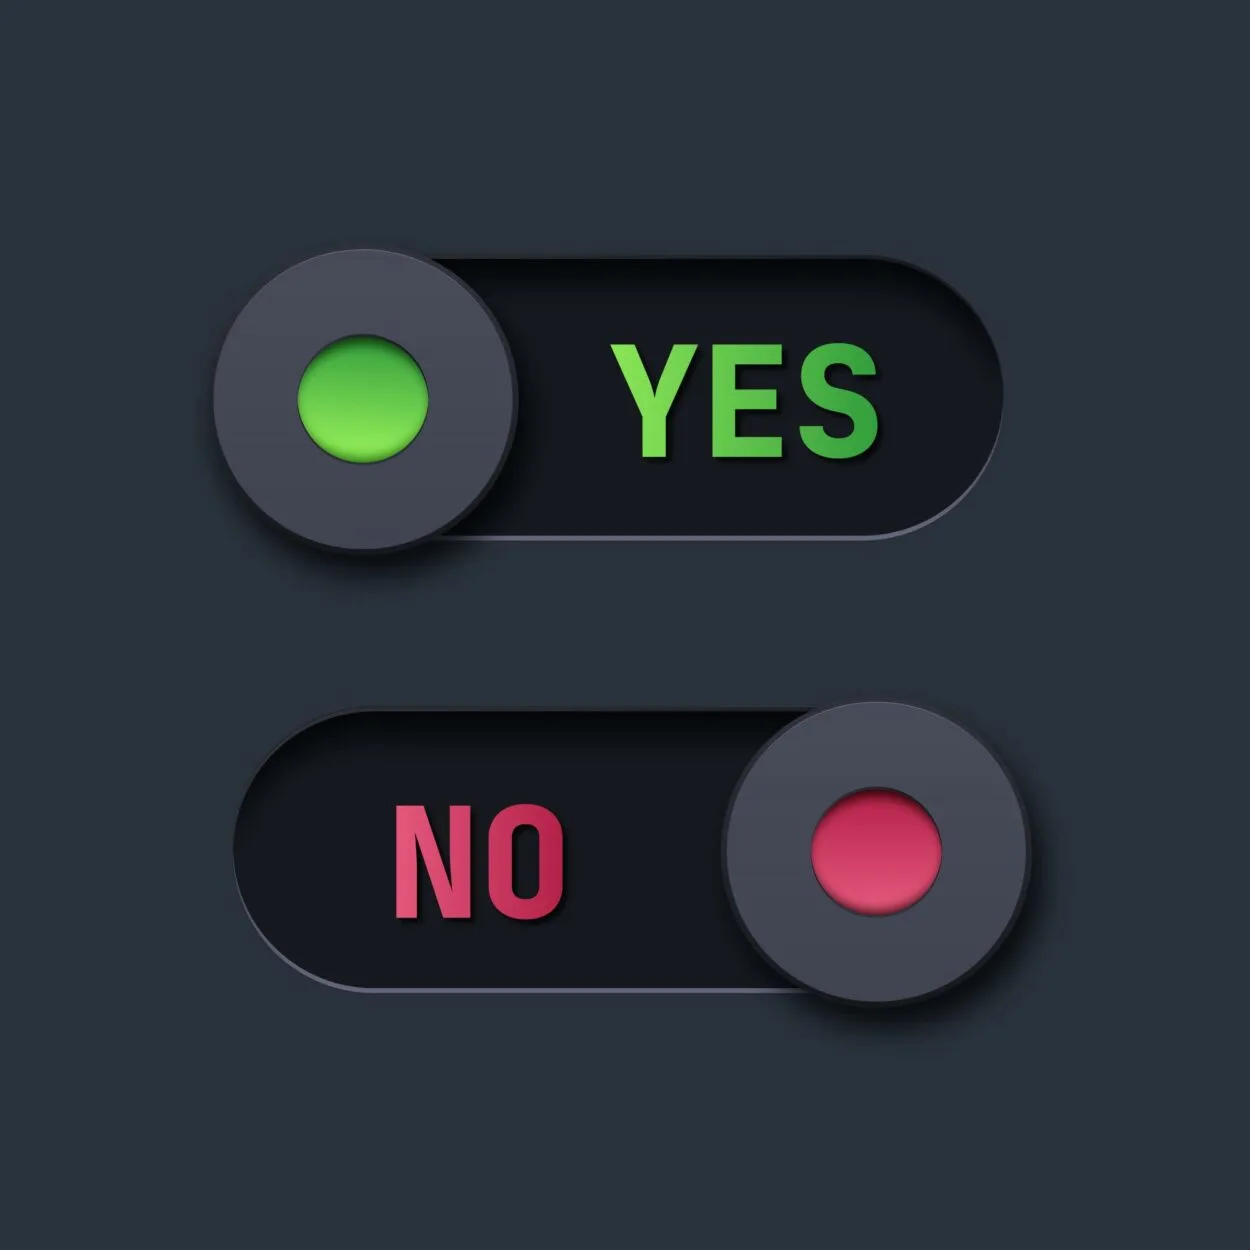 Yes: toggle towards the right & No: toggle towards the left